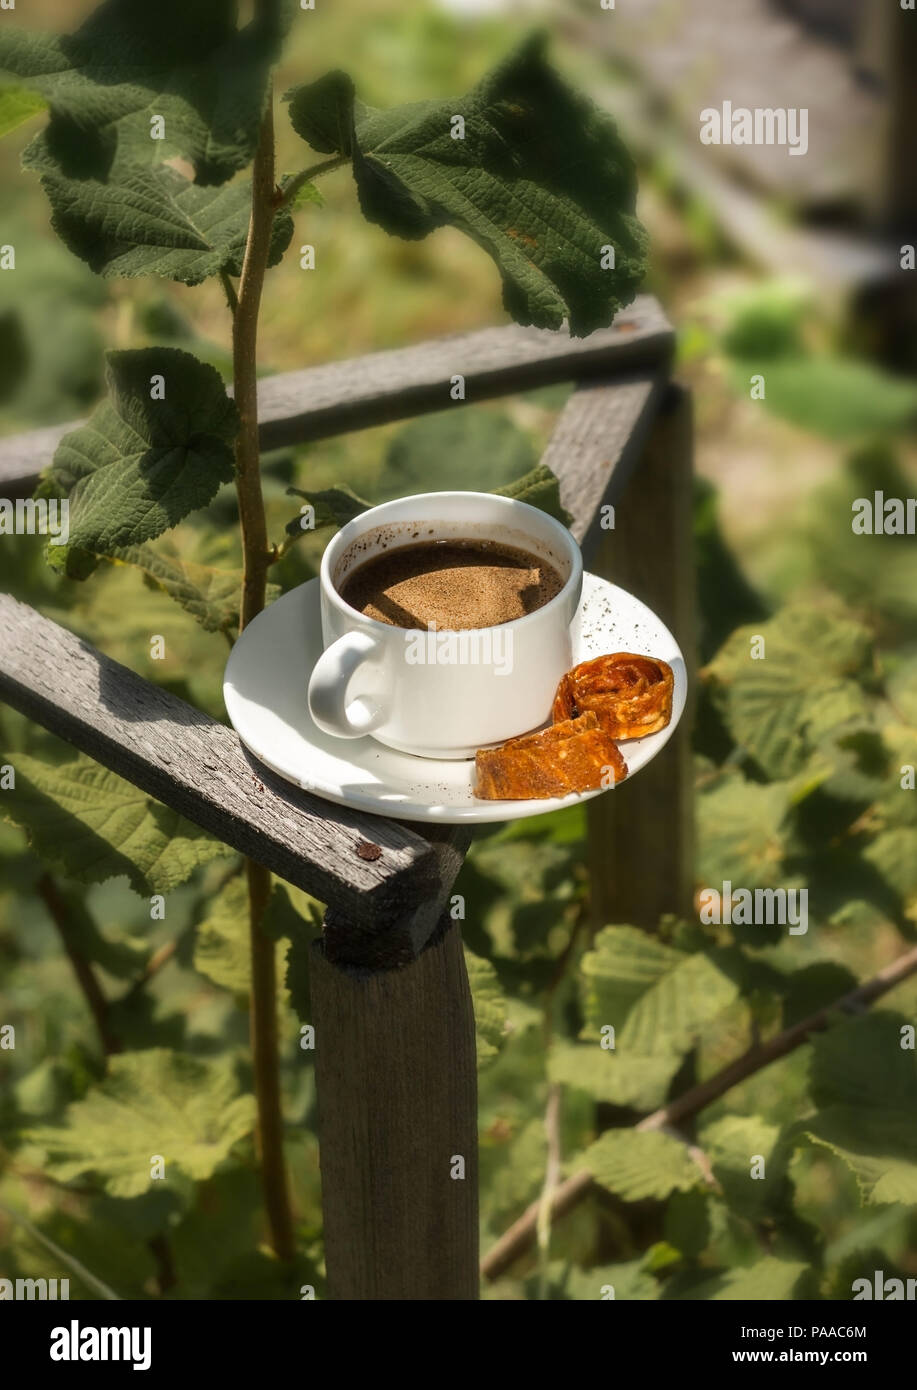 Slow life. A cup of coffee in the garden on the background of leaves Stock Photo